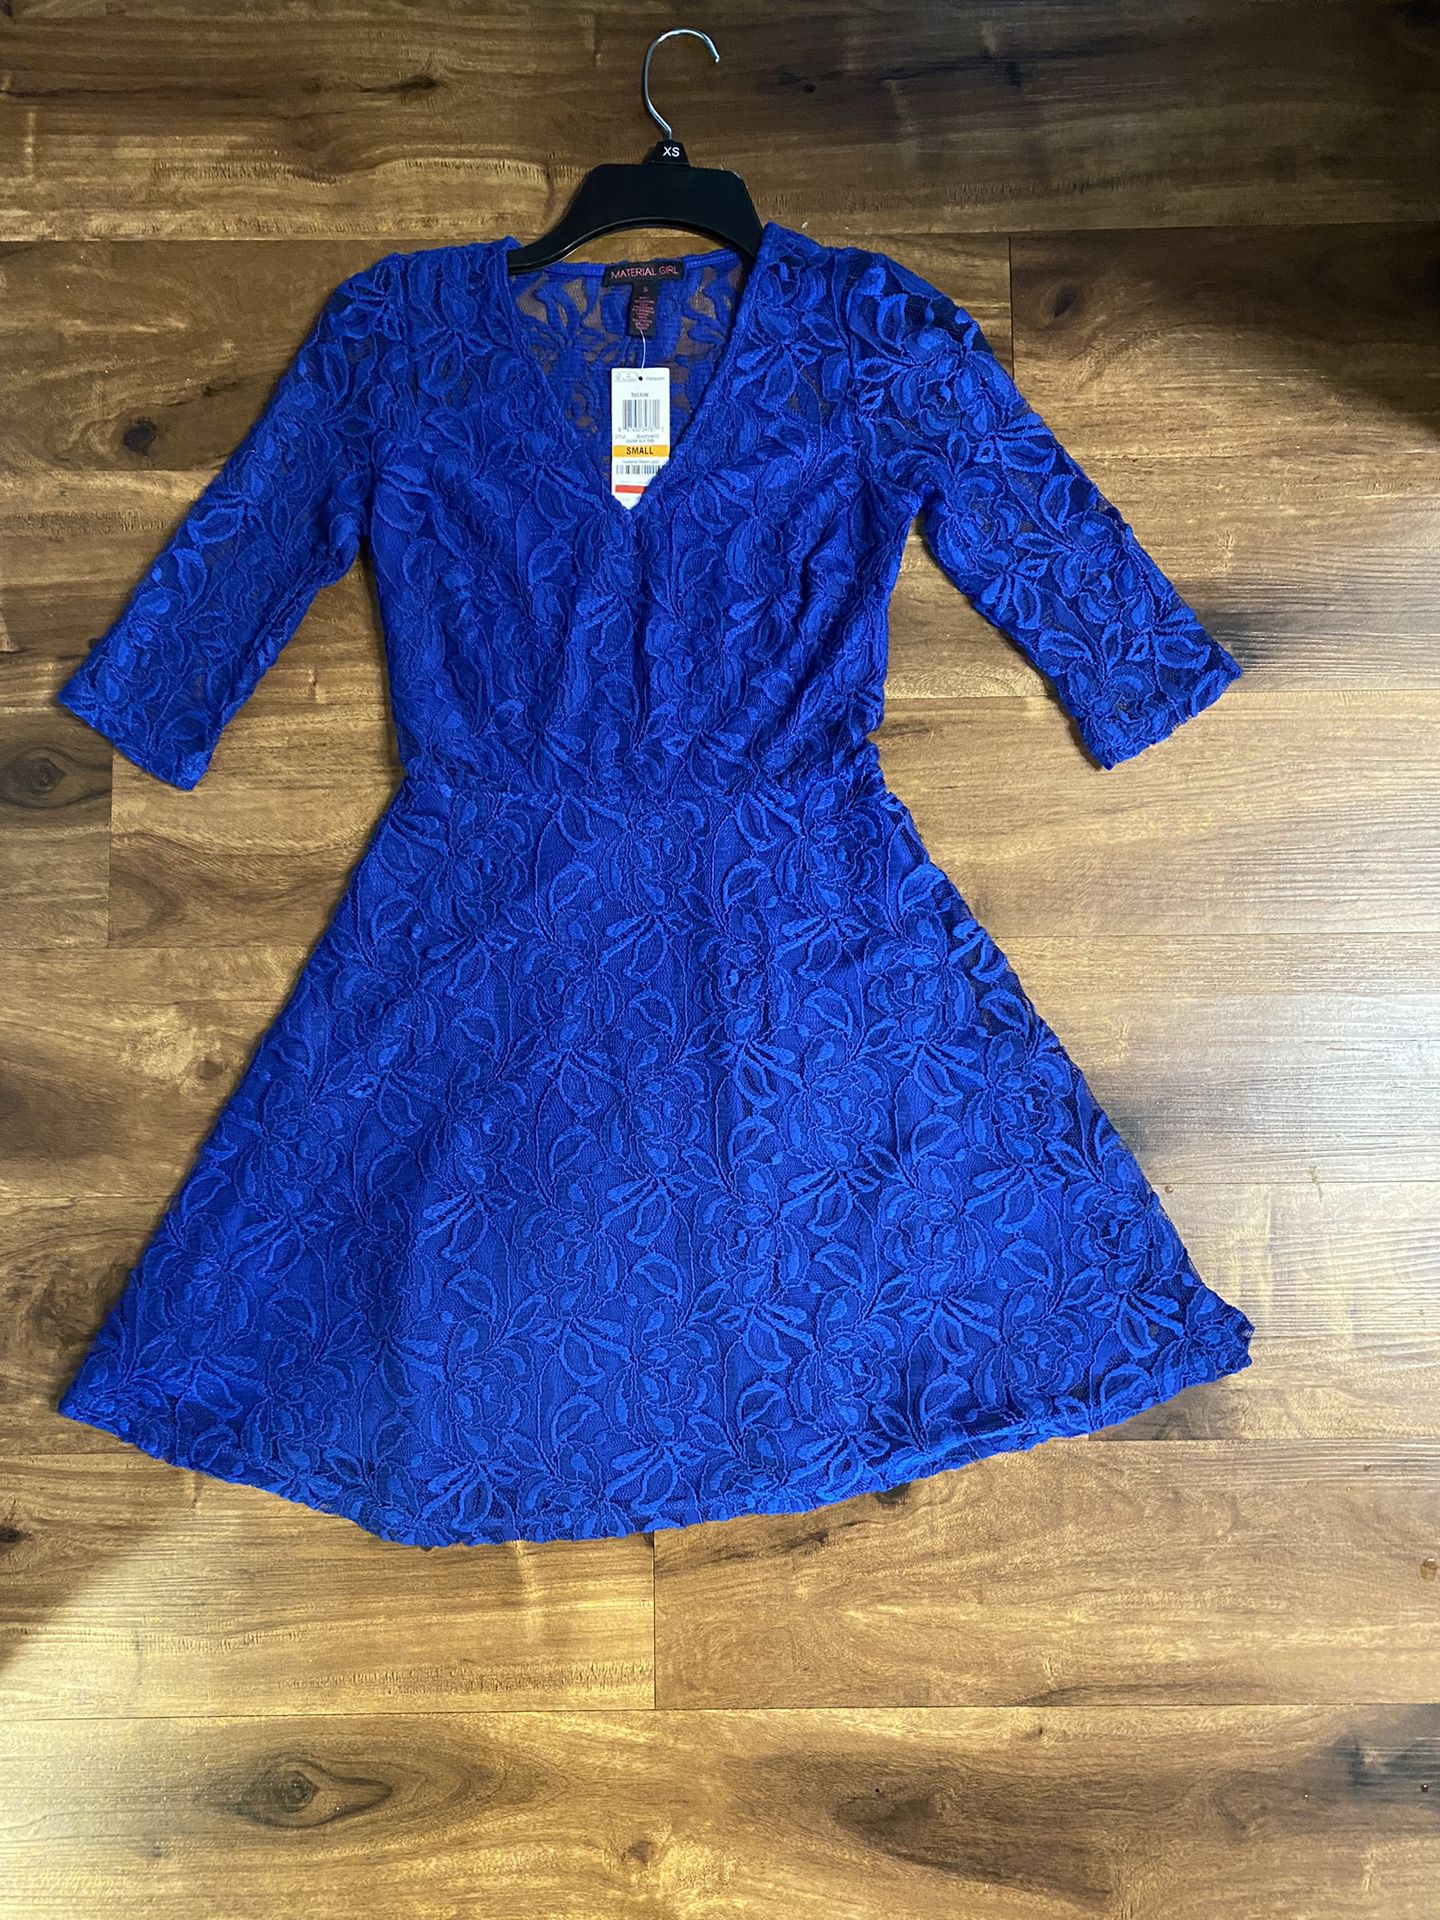 Brand New Woman’s Material Girl brand Blue Dress Up For Sale 